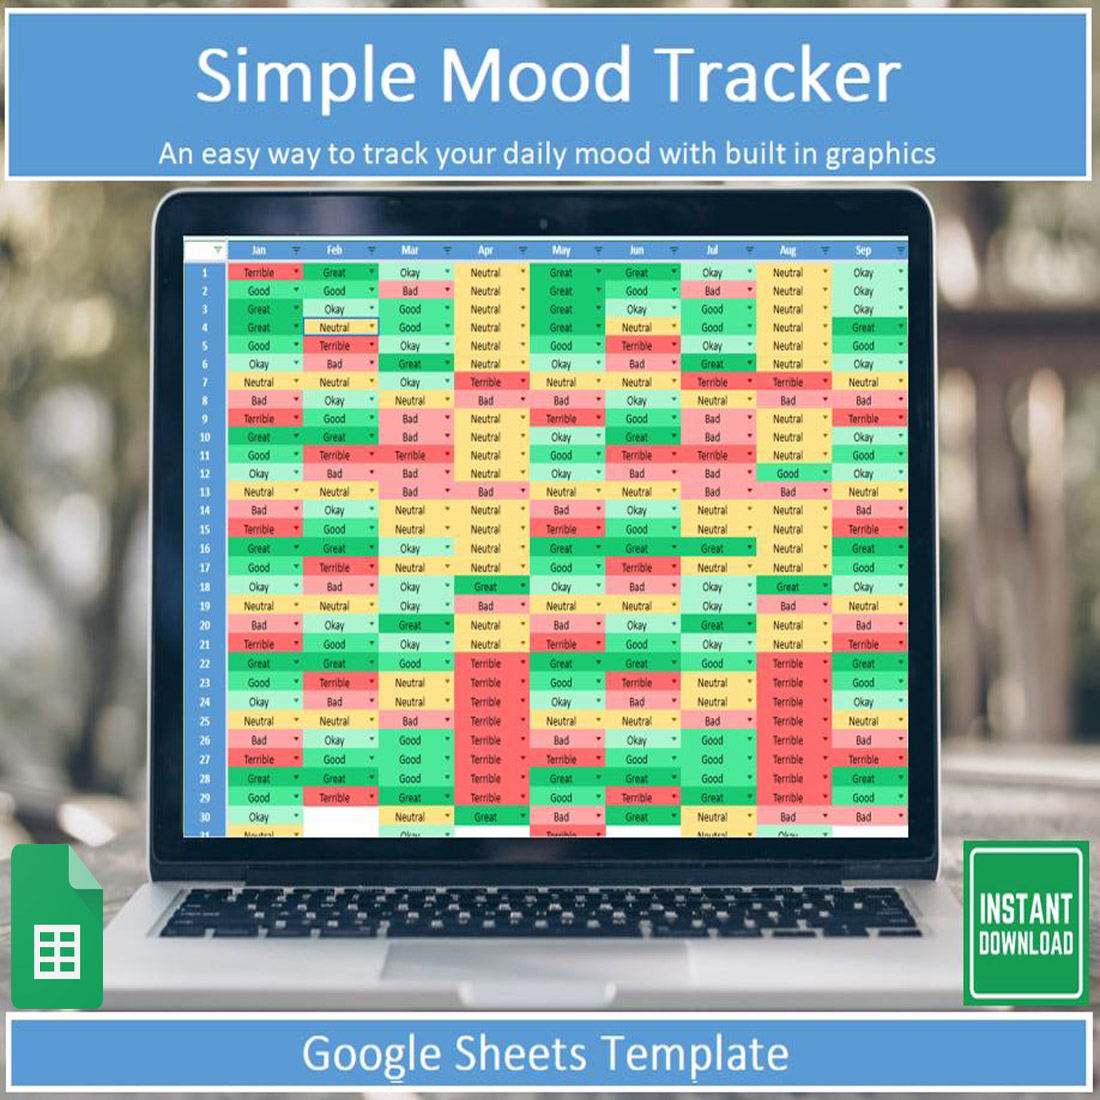 Simple Mood Tracker for Google Sheets cover image.